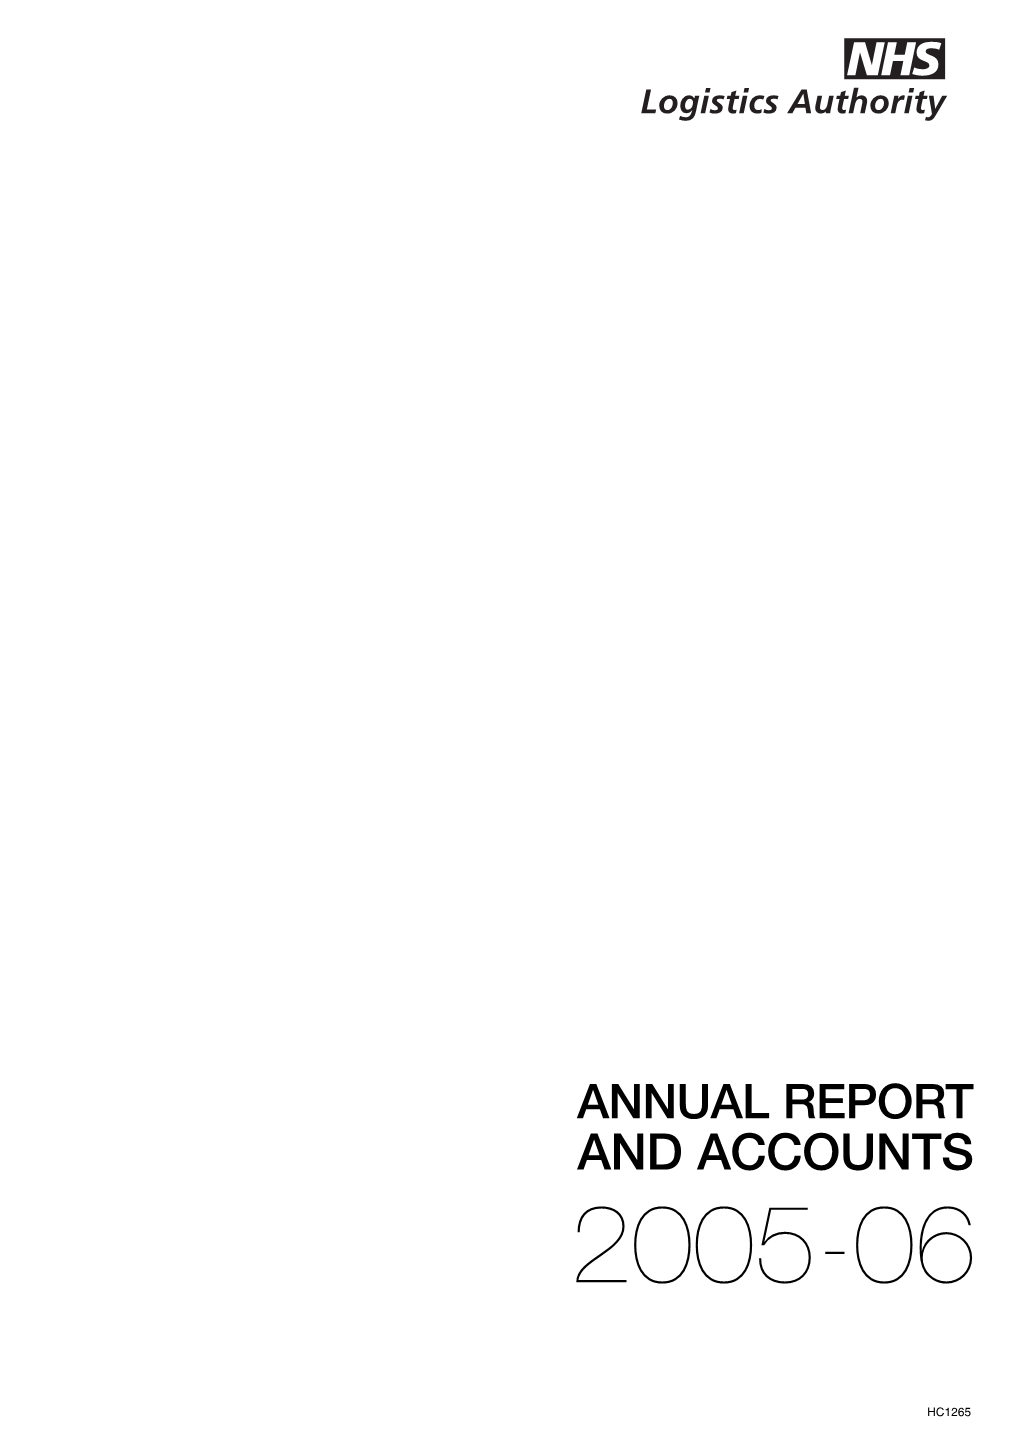 NHS Logistics Authority Annual Report and Accounts 2005-06